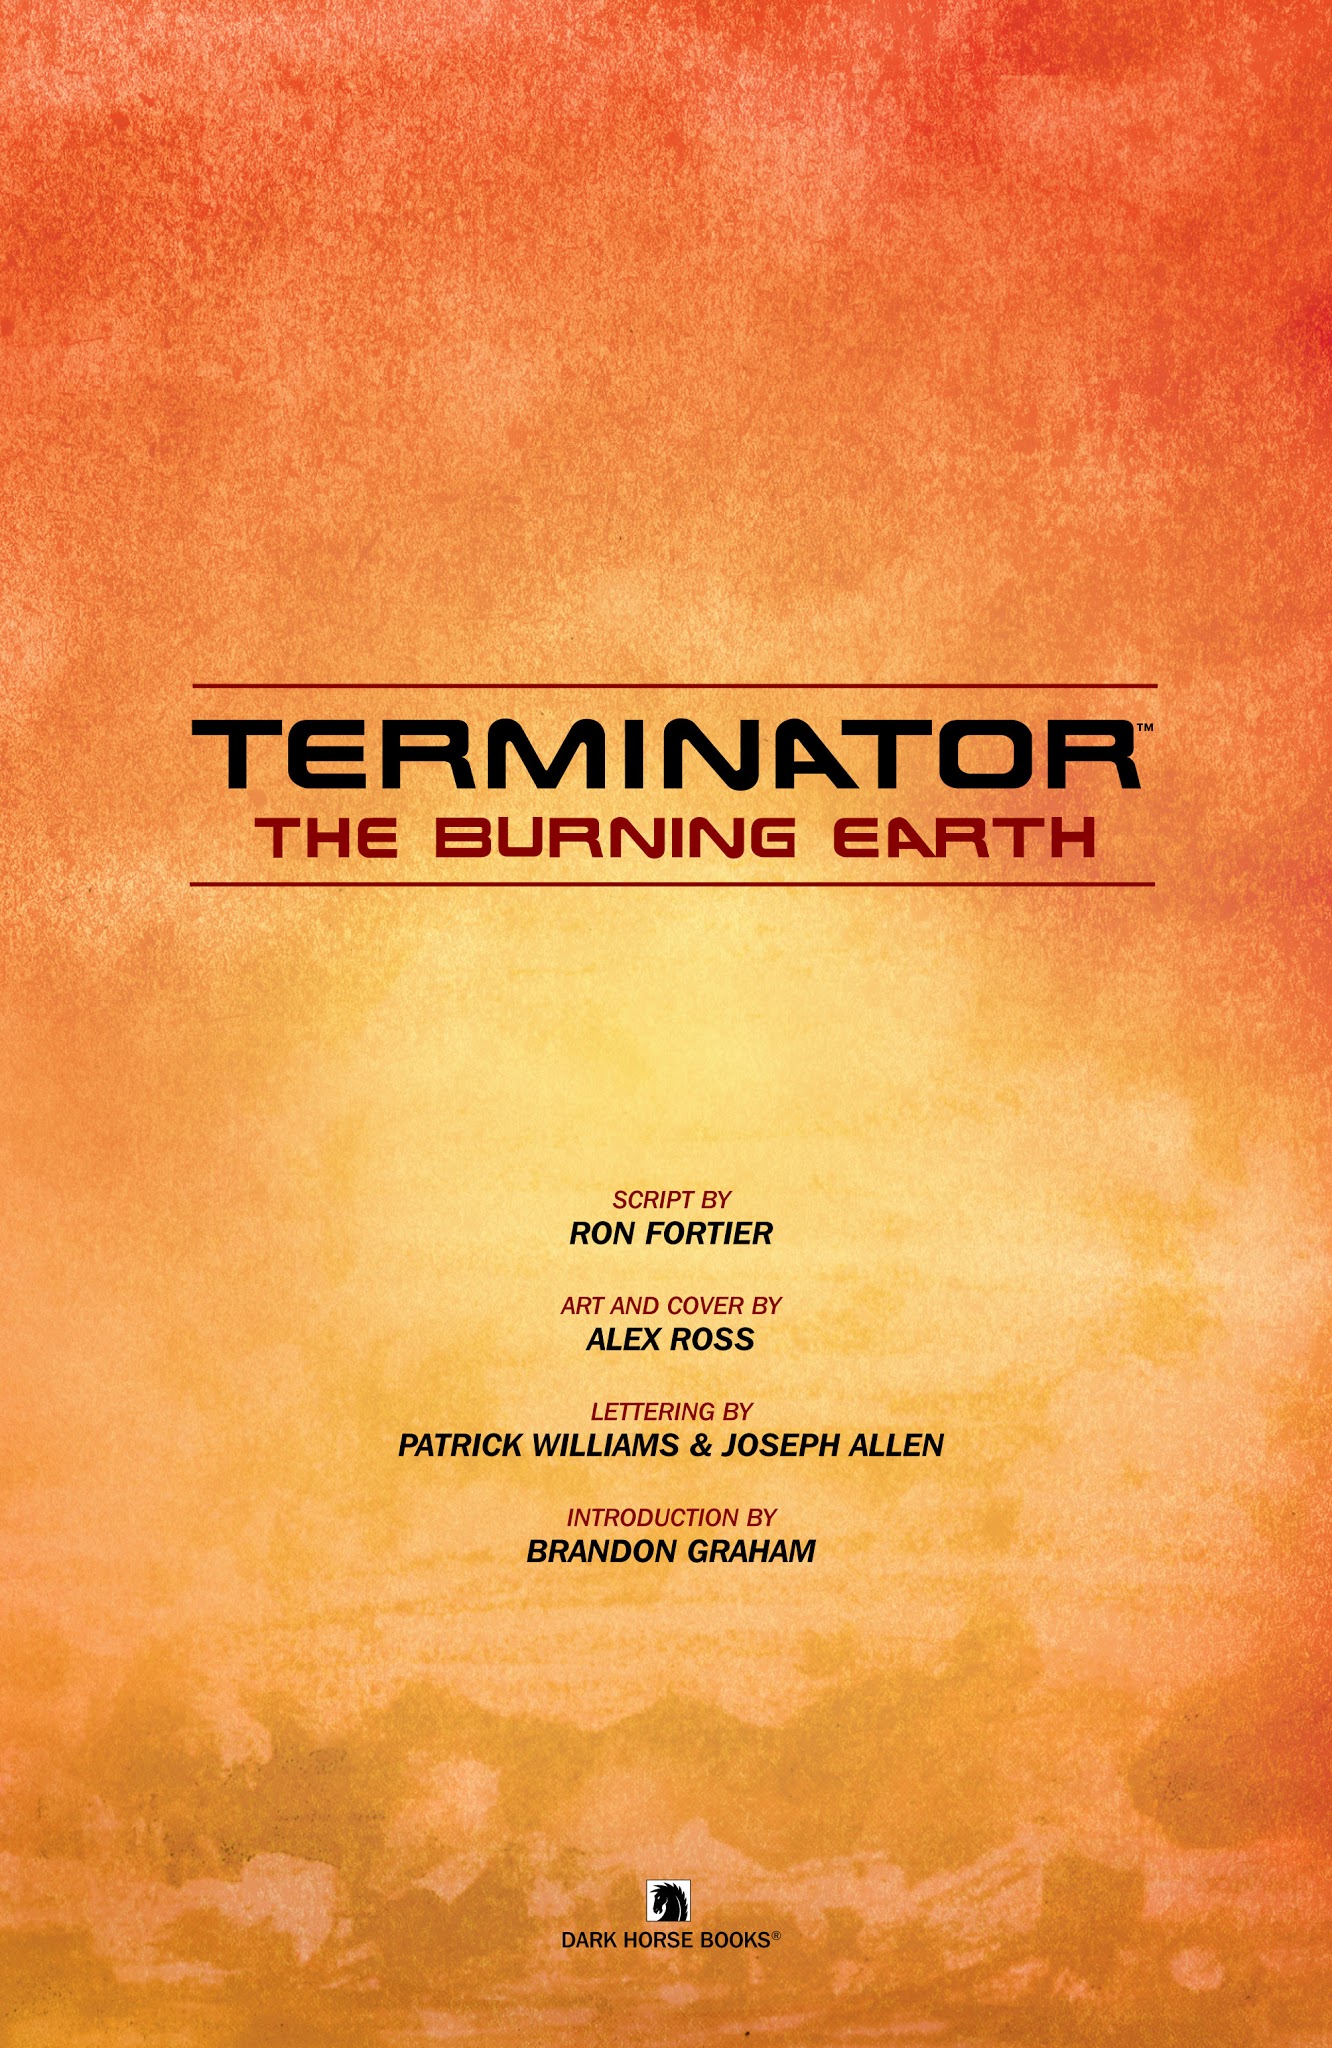 Read online The Terminator: The Burning Earth comic -  Issue # TPB - 5